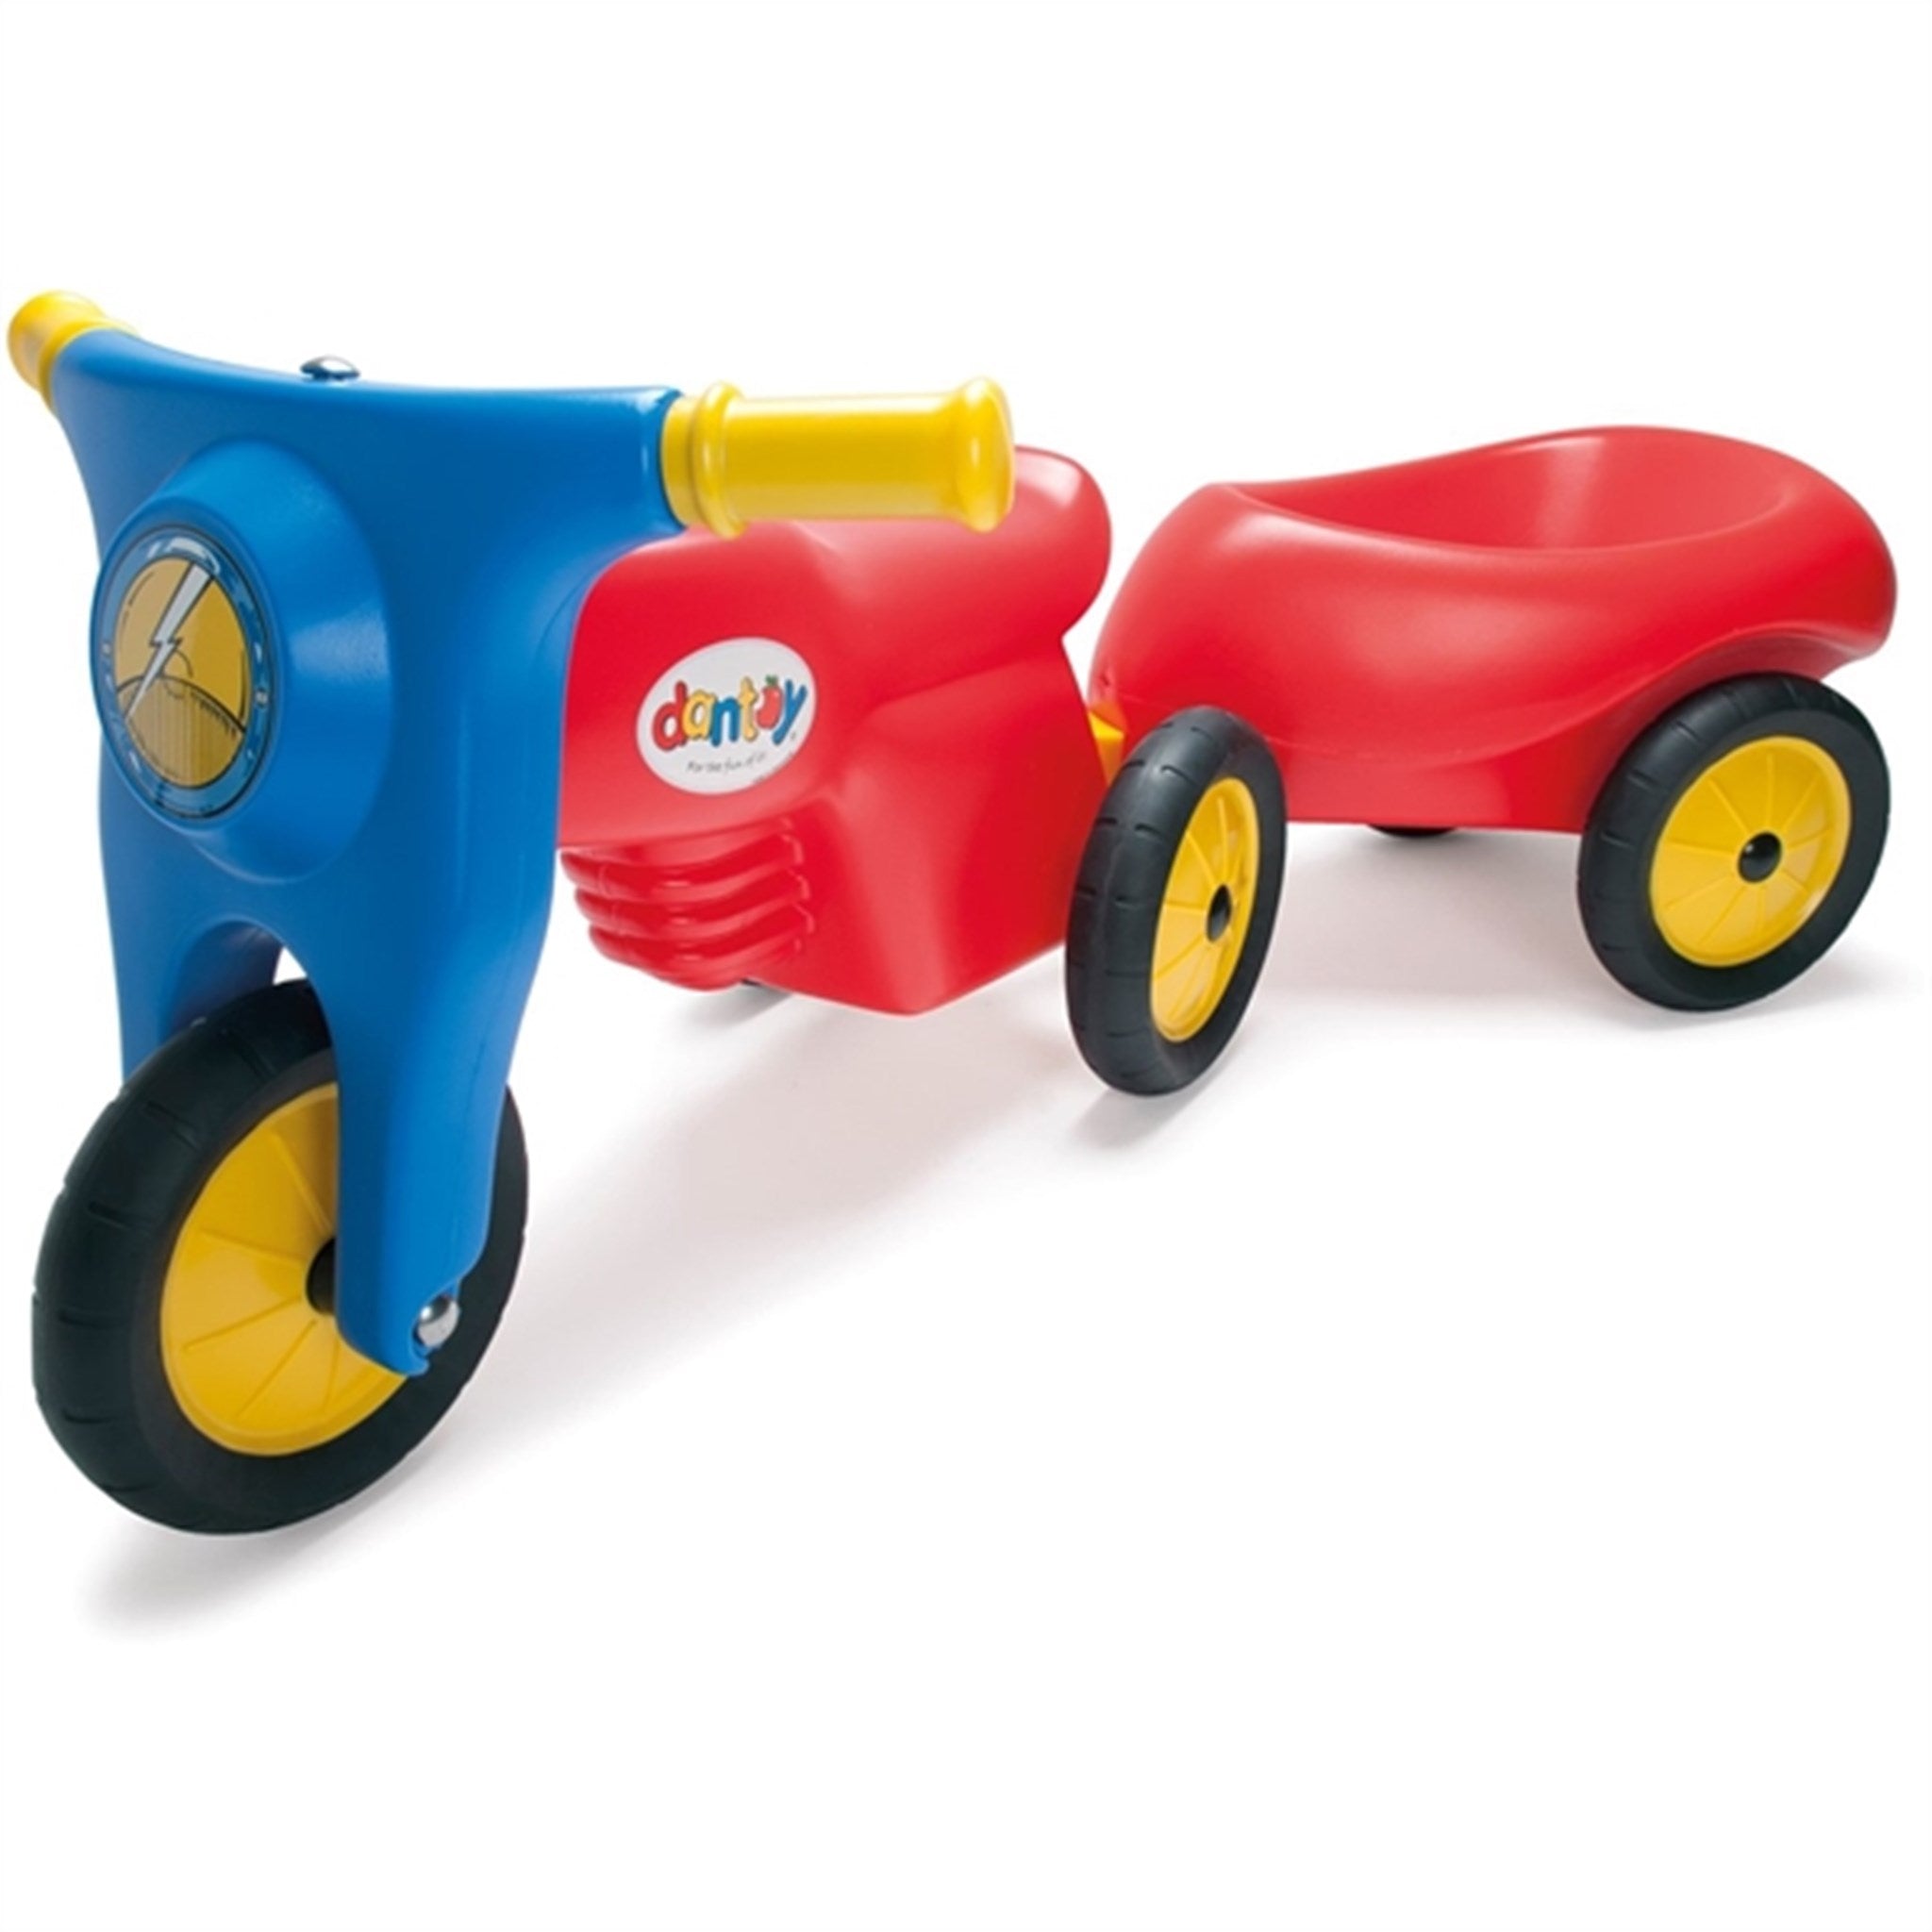 Dantoy Dt Trailer With Rubber Wheels 2